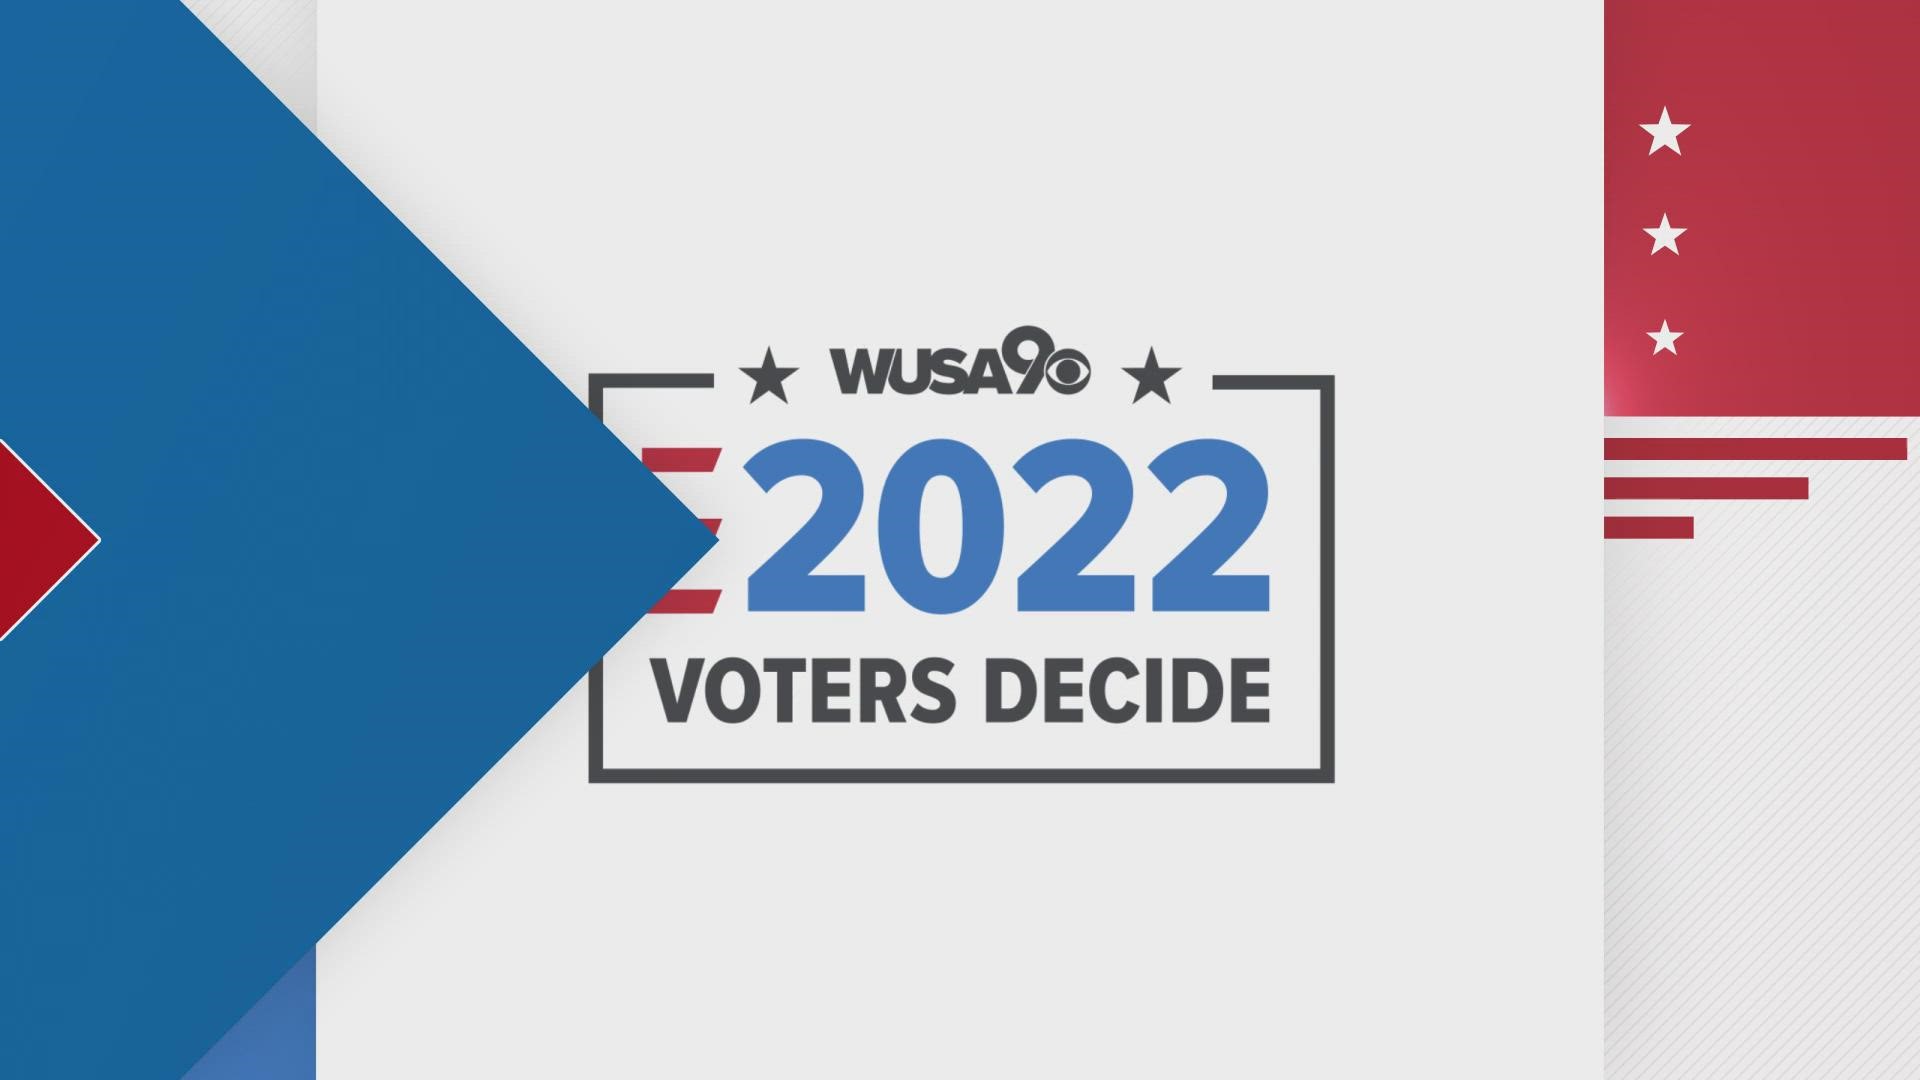 WUSA9 will be LIVE starting at 7pm on WUSA9+